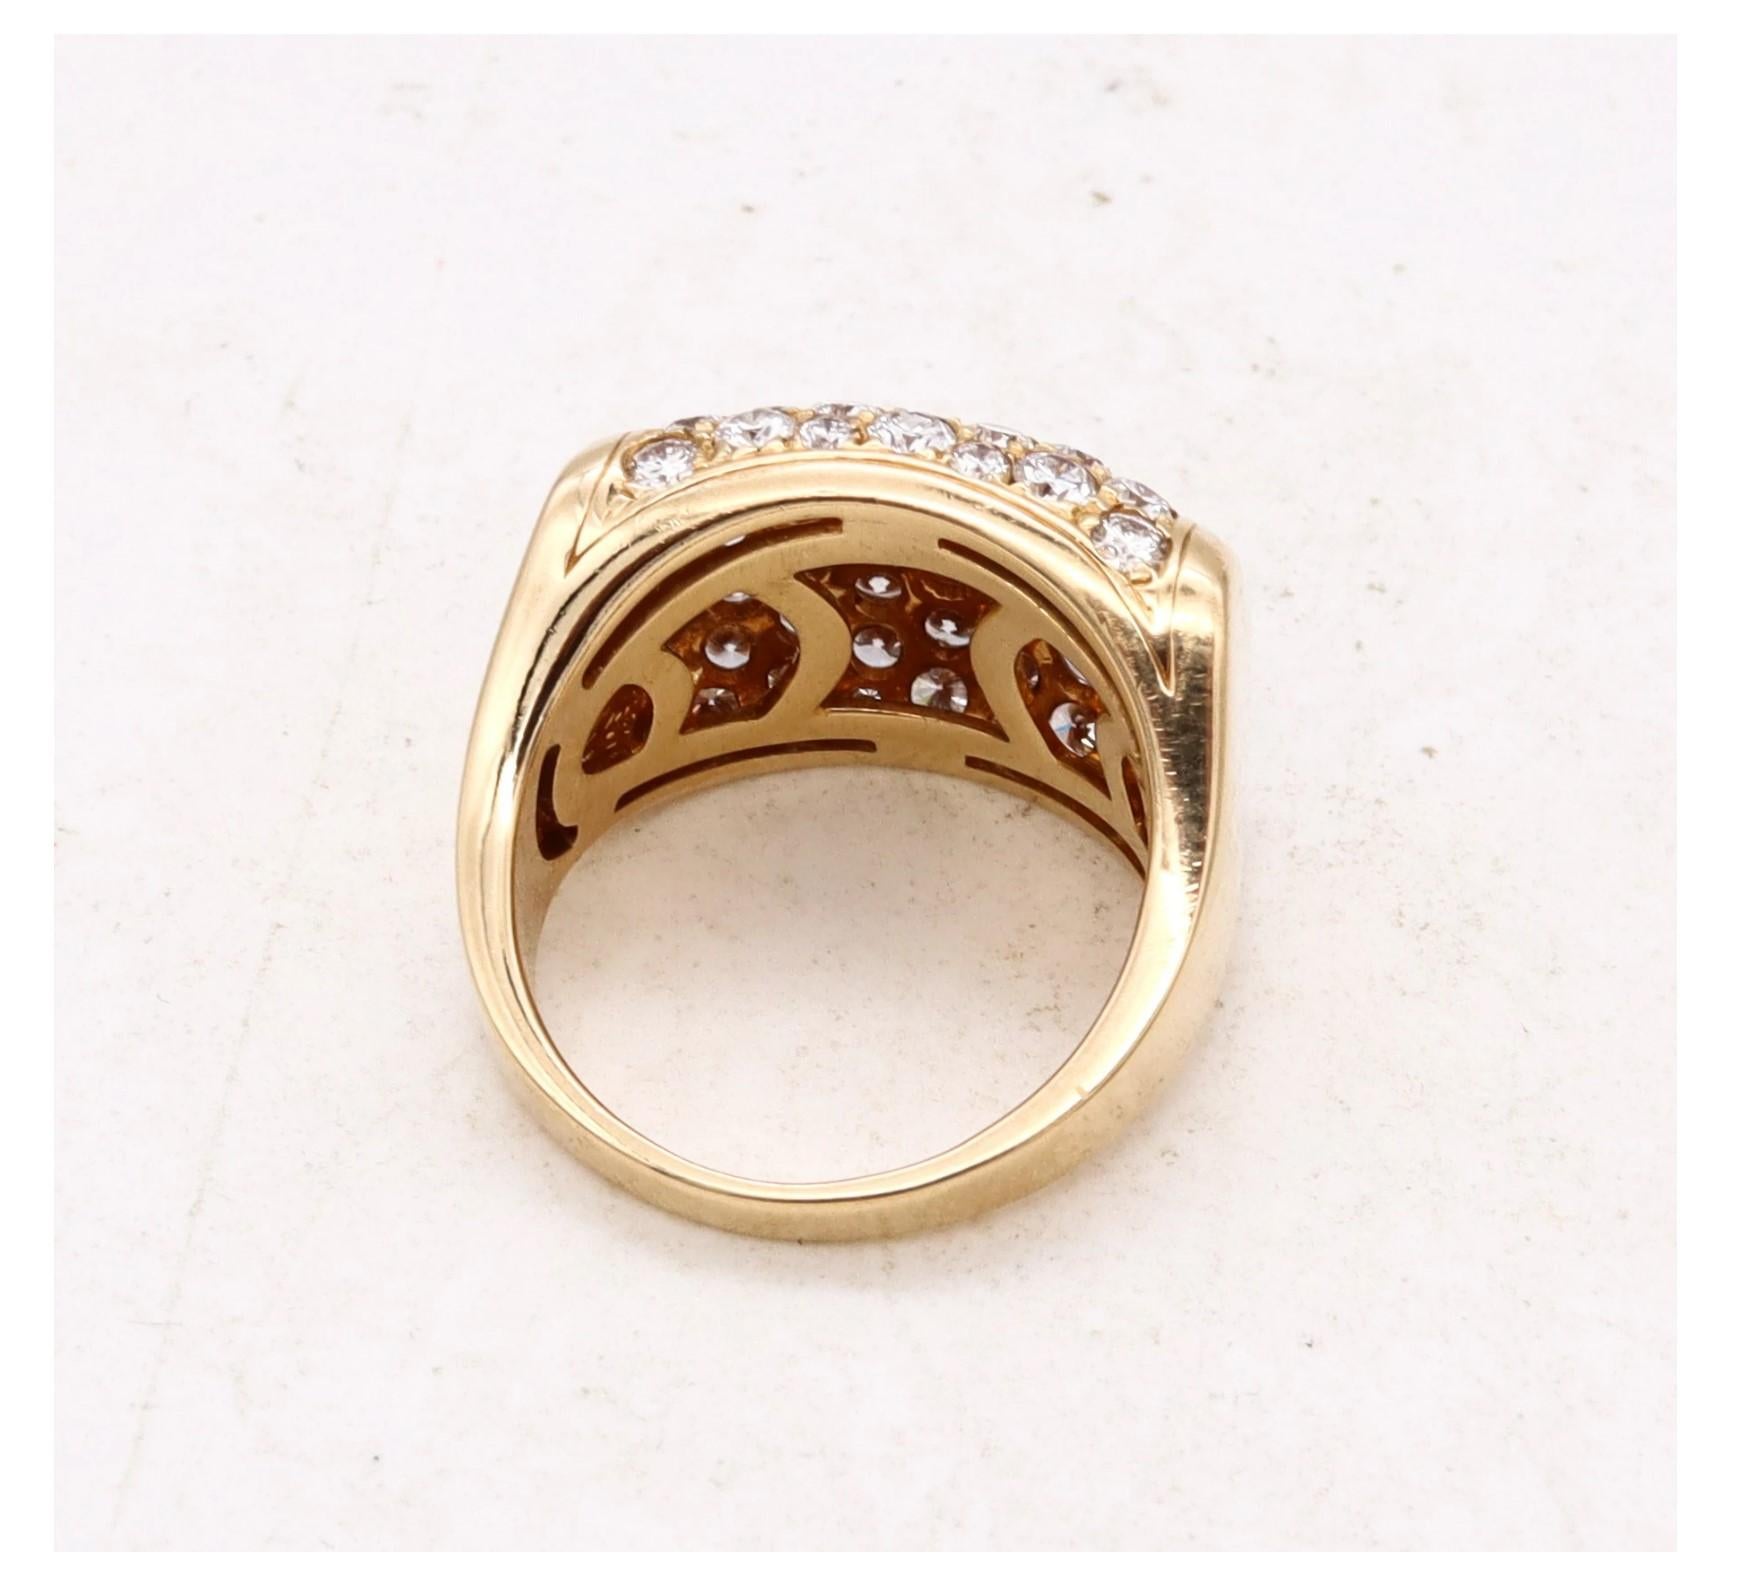 Bvlgari Roma Millenia Cocktail Ring in 18Kt Gold with 3.18 Cts in VS Diamonds In Excellent Condition For Sale In Miami, FL